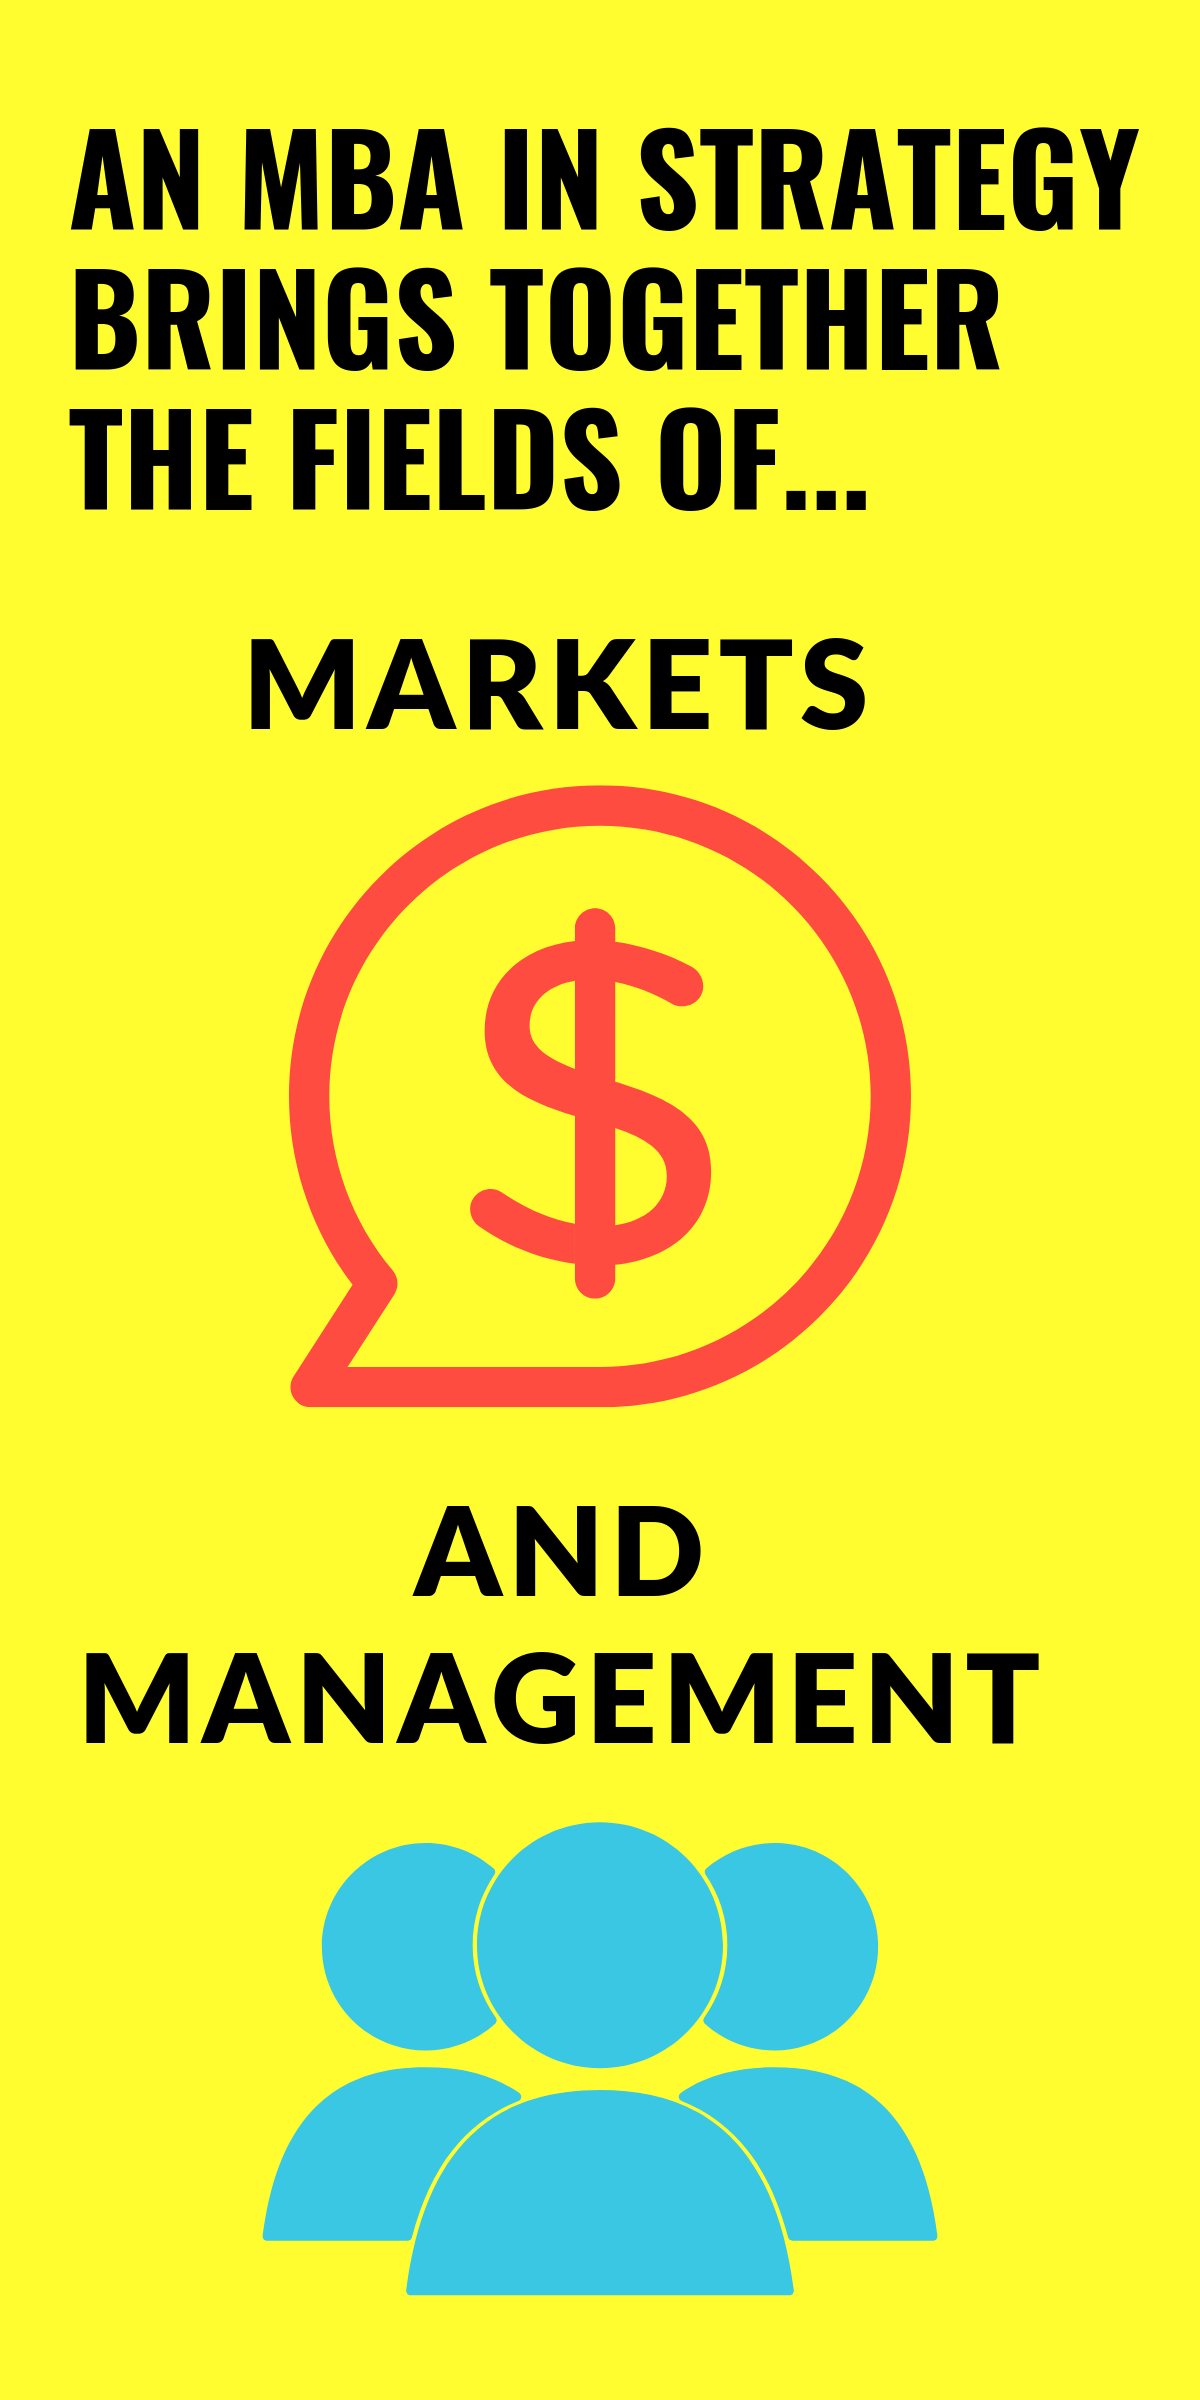 An MBA in strategy brings together the fields of markets & management.